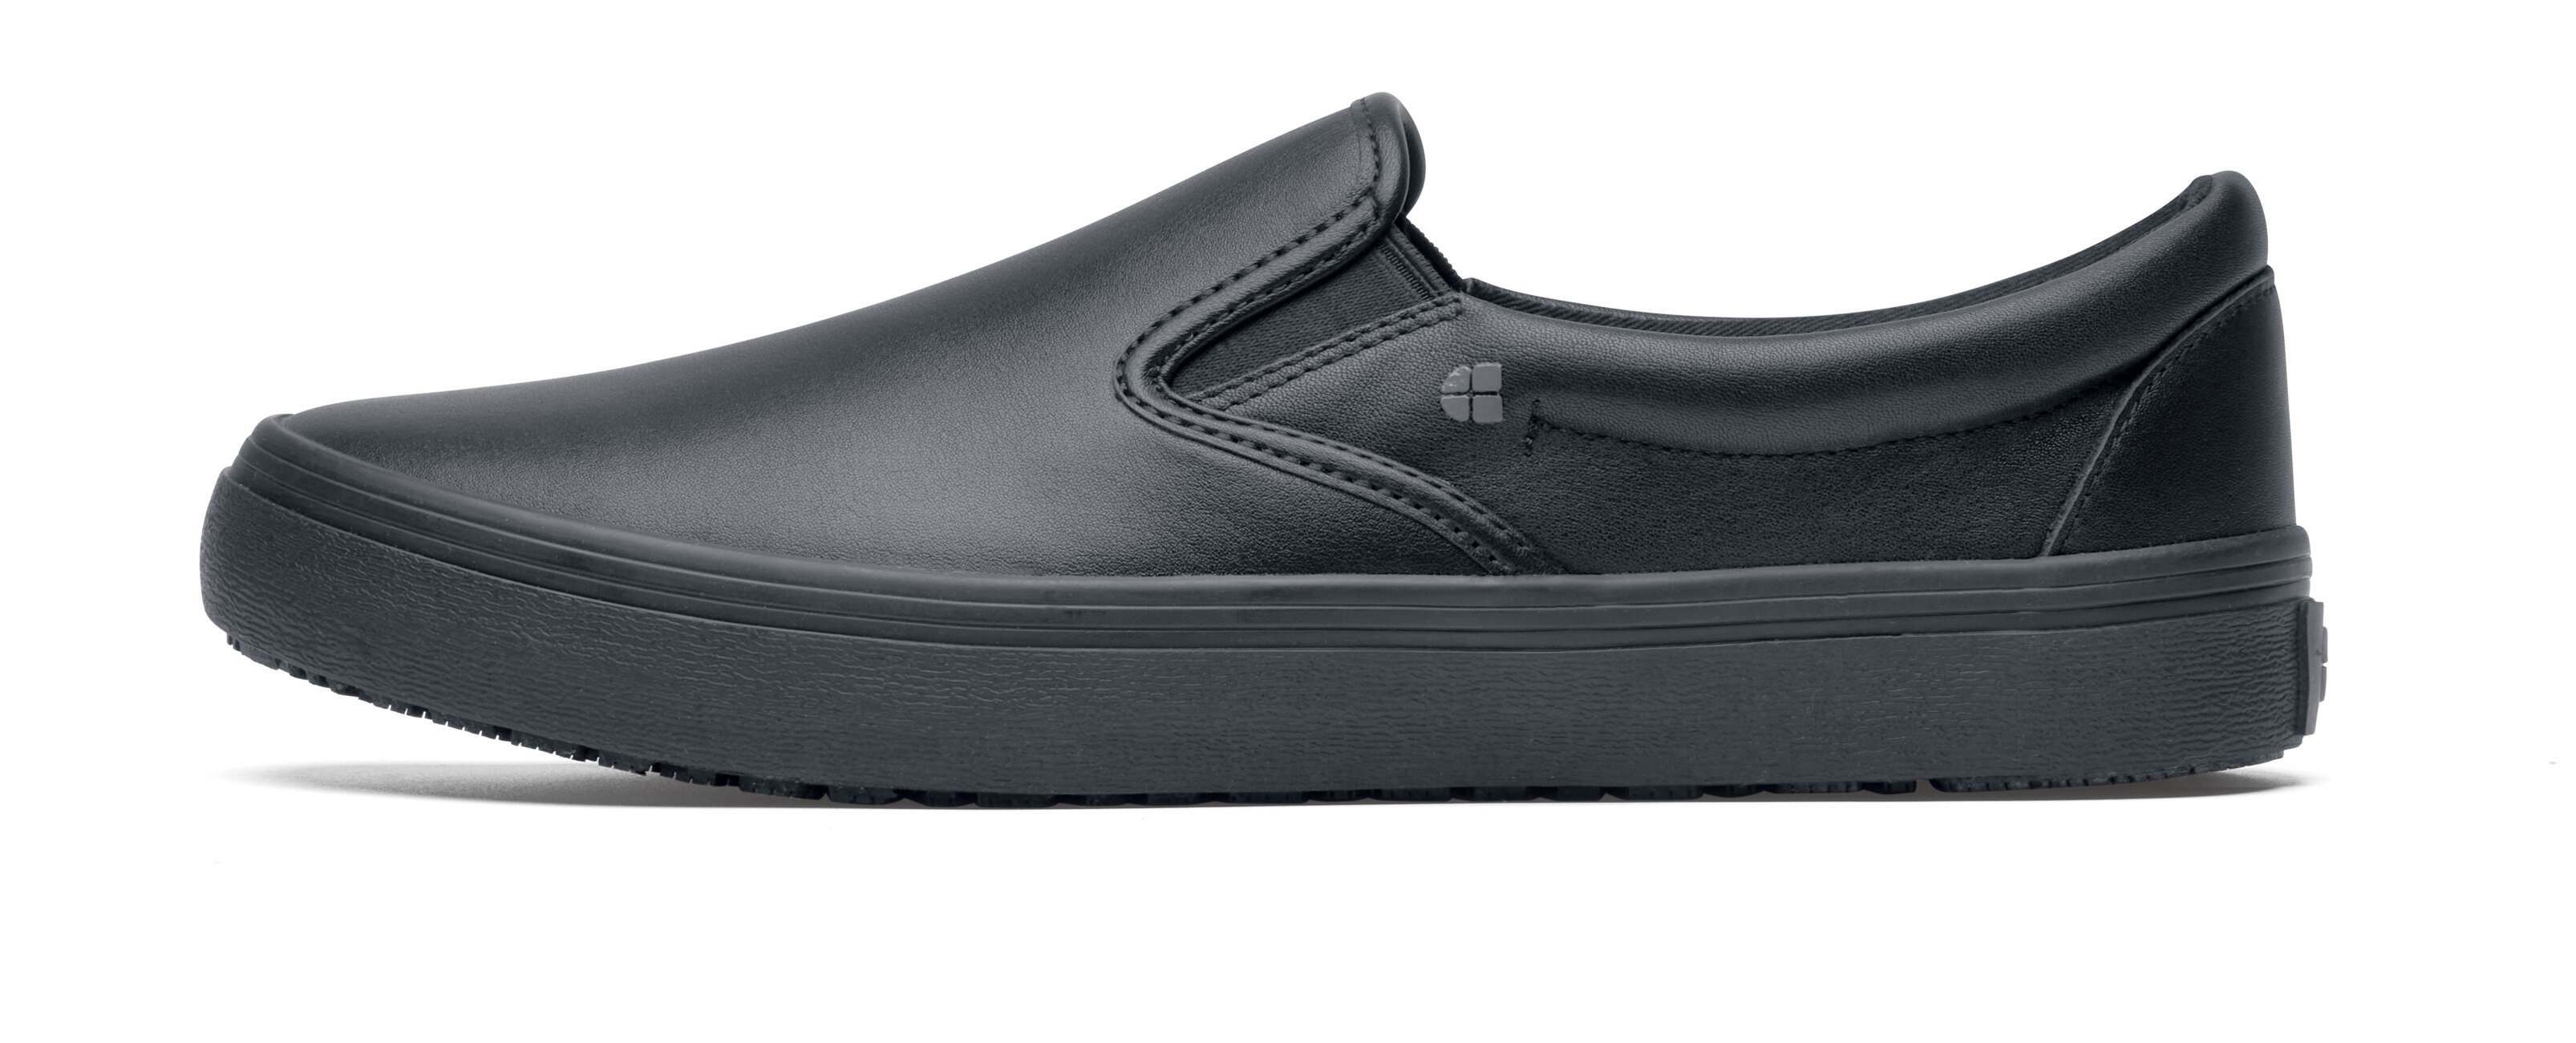 MERLIN BLACK - From Shoes For Crews UK | Casual Slip Resistant Shoes